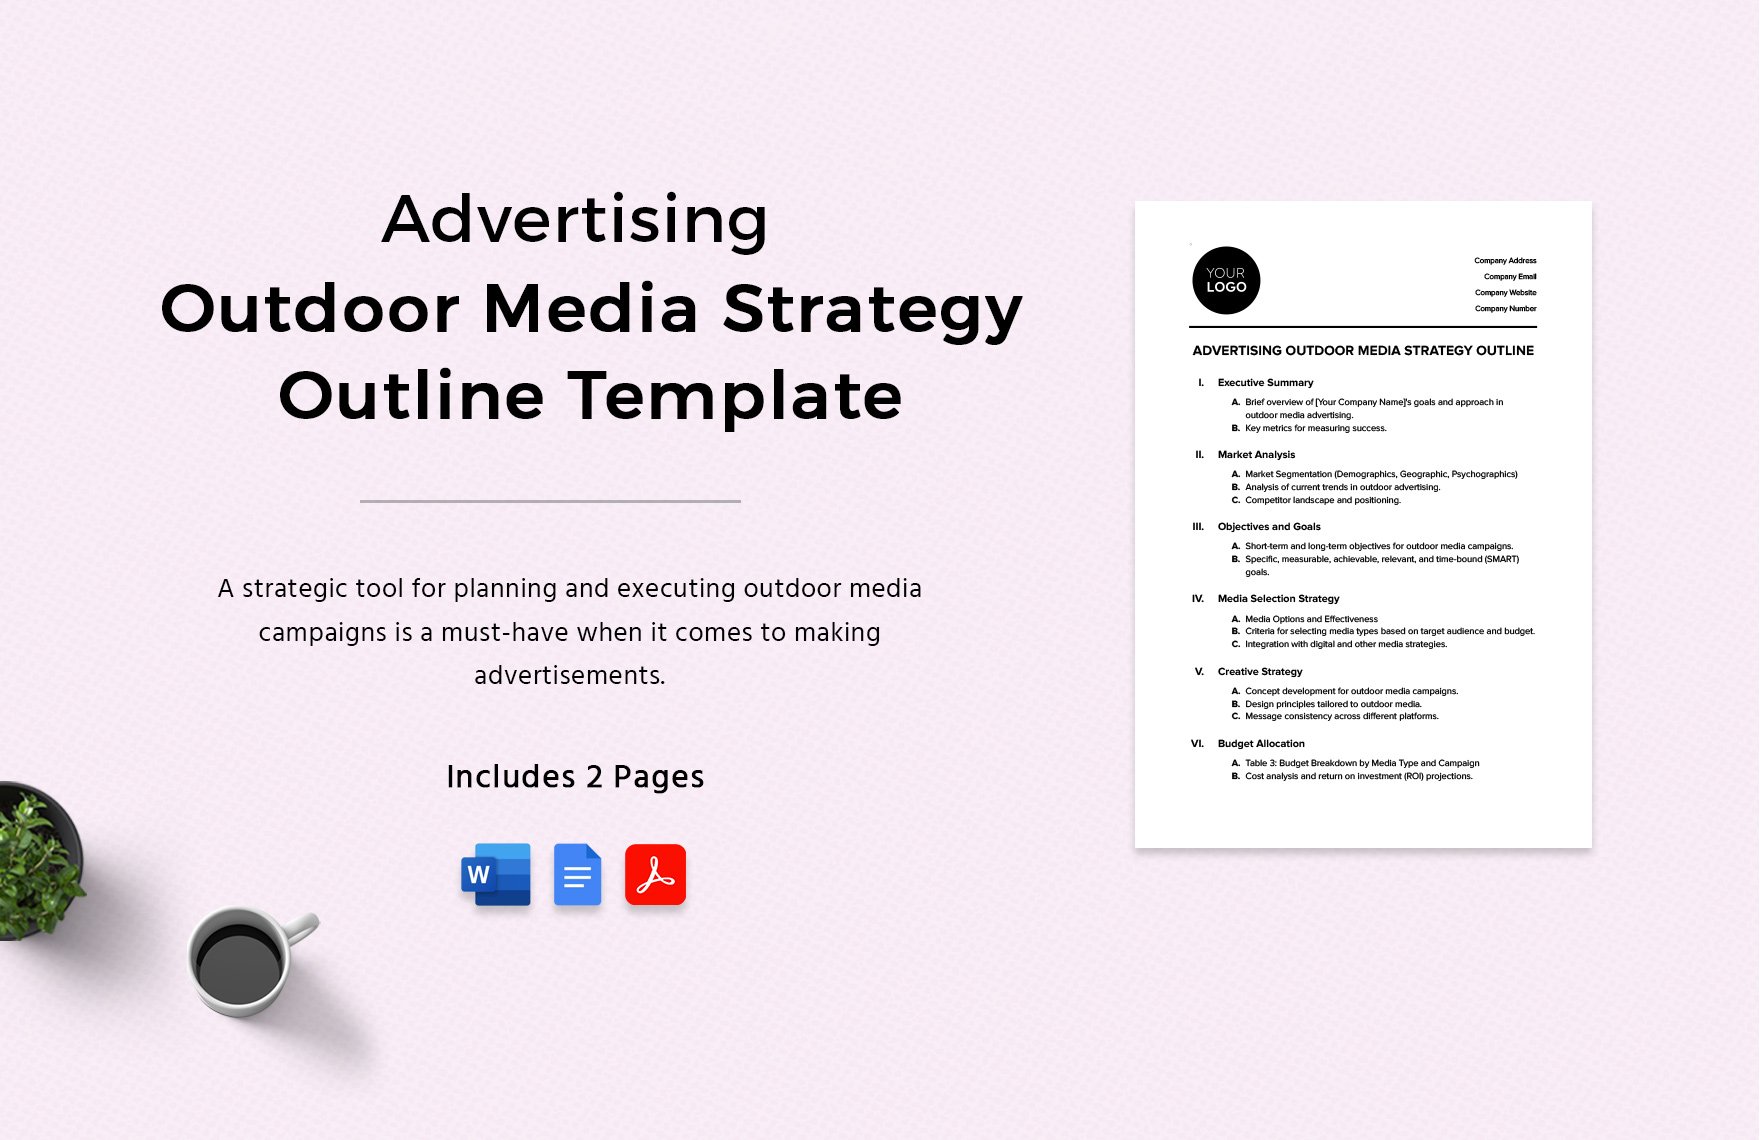 Advertising Outdoor Media Strategy Outline Template